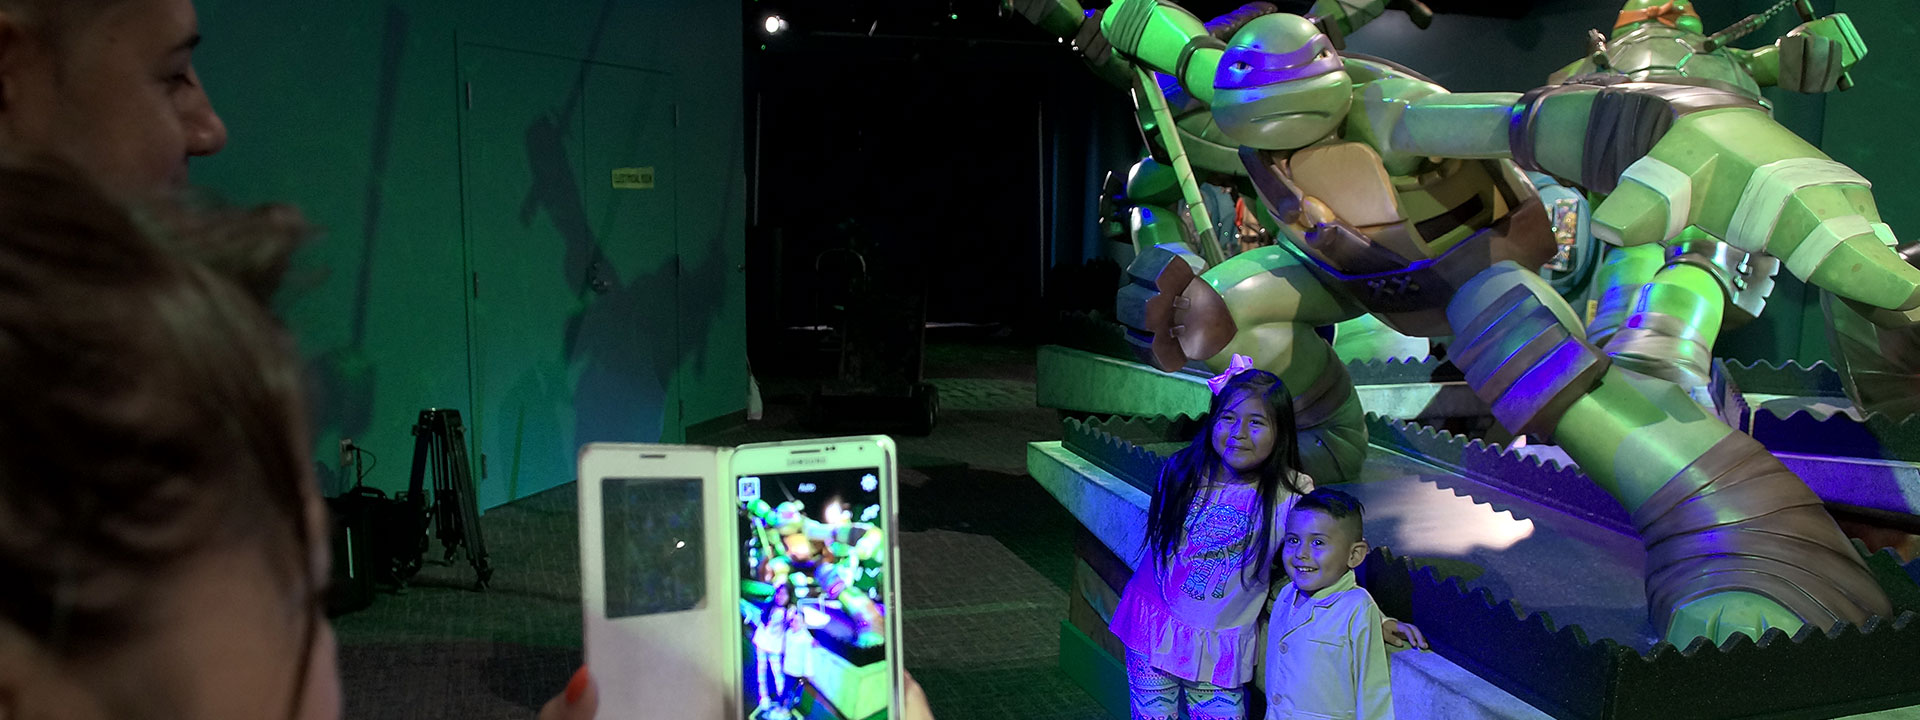 Children getting their photo taken in front of life-sized sculptures of the Teenage Mutant Ninja Turtles.